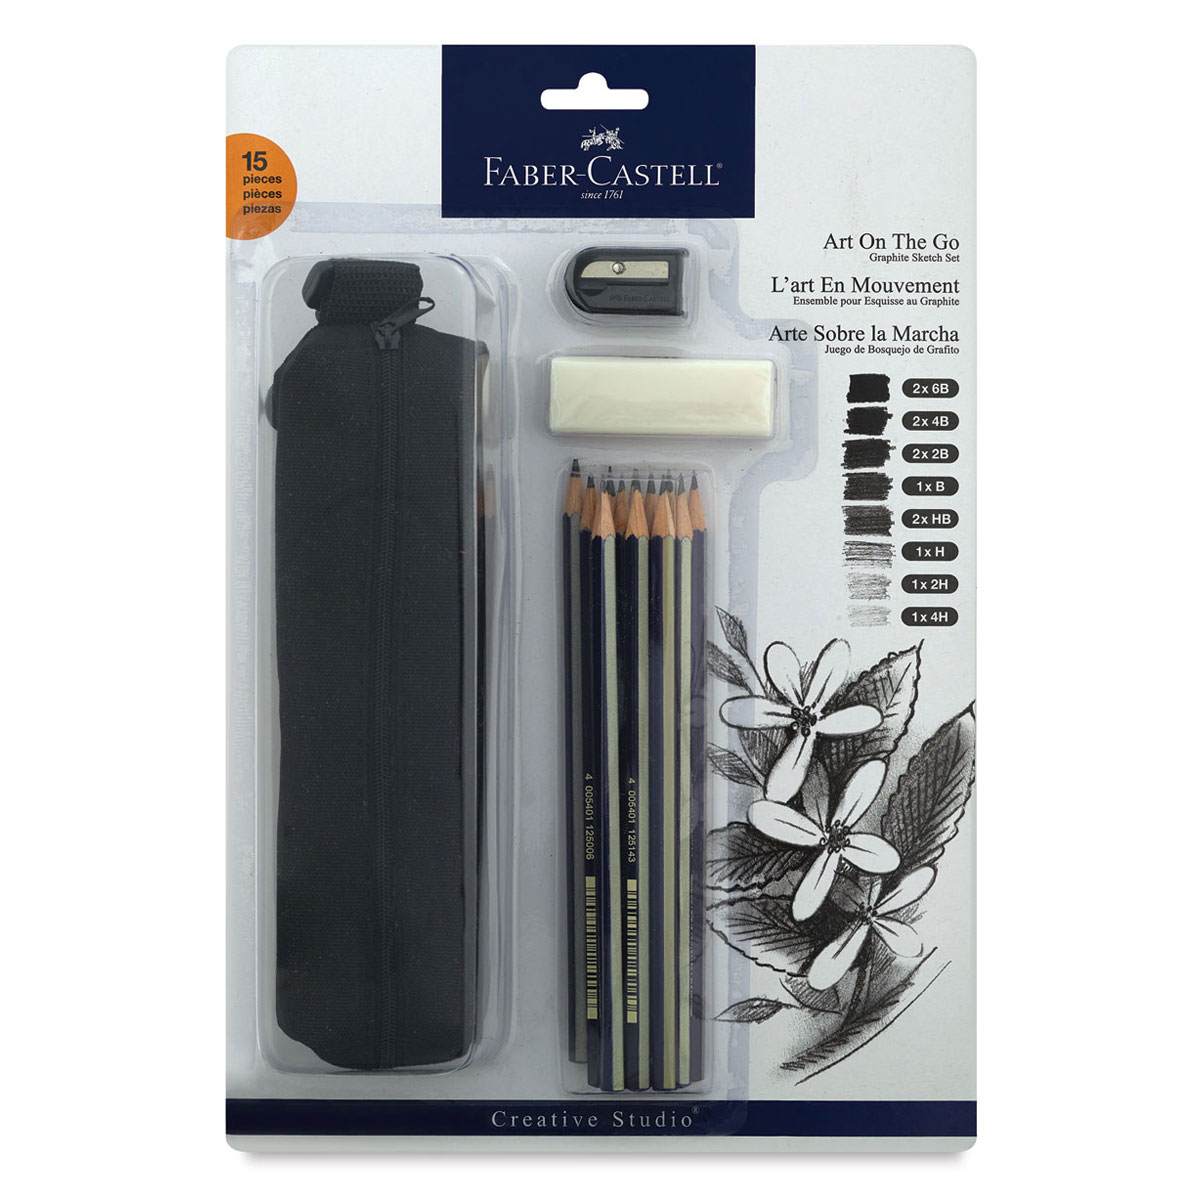 Art on The Go Graphite Sketch Set - #701000T – Faber-Castell USA